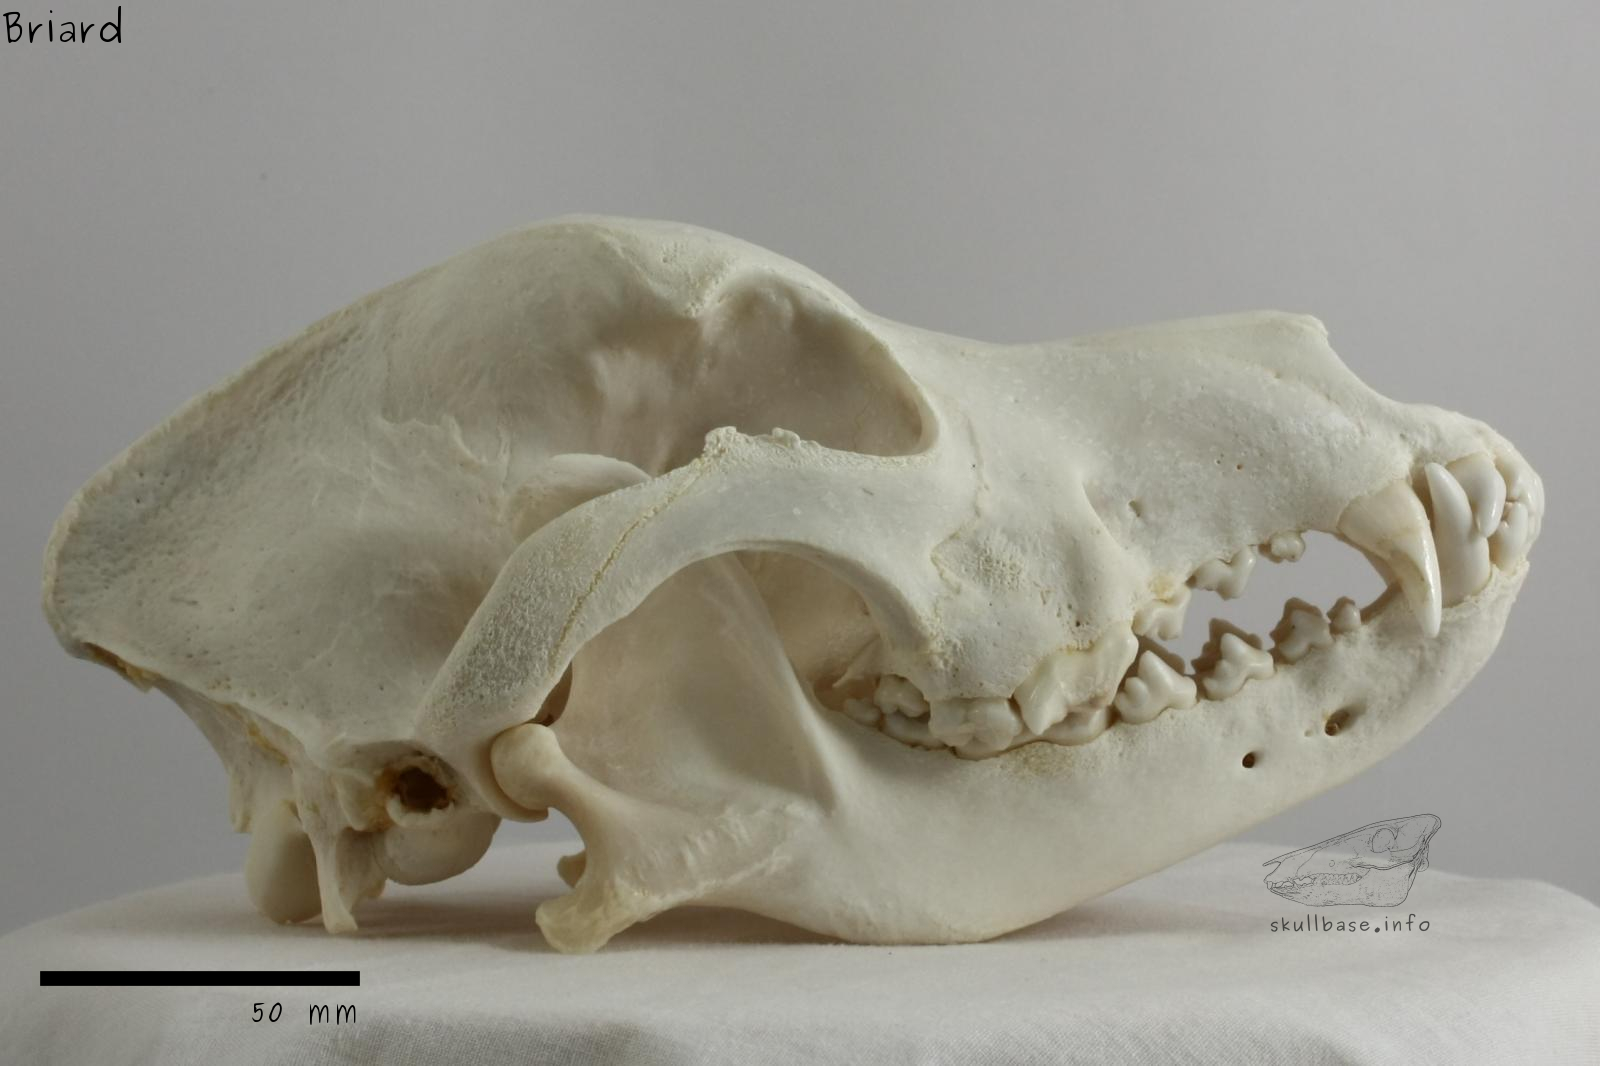 Briard (Canis lupus familiaris) skull lateral view